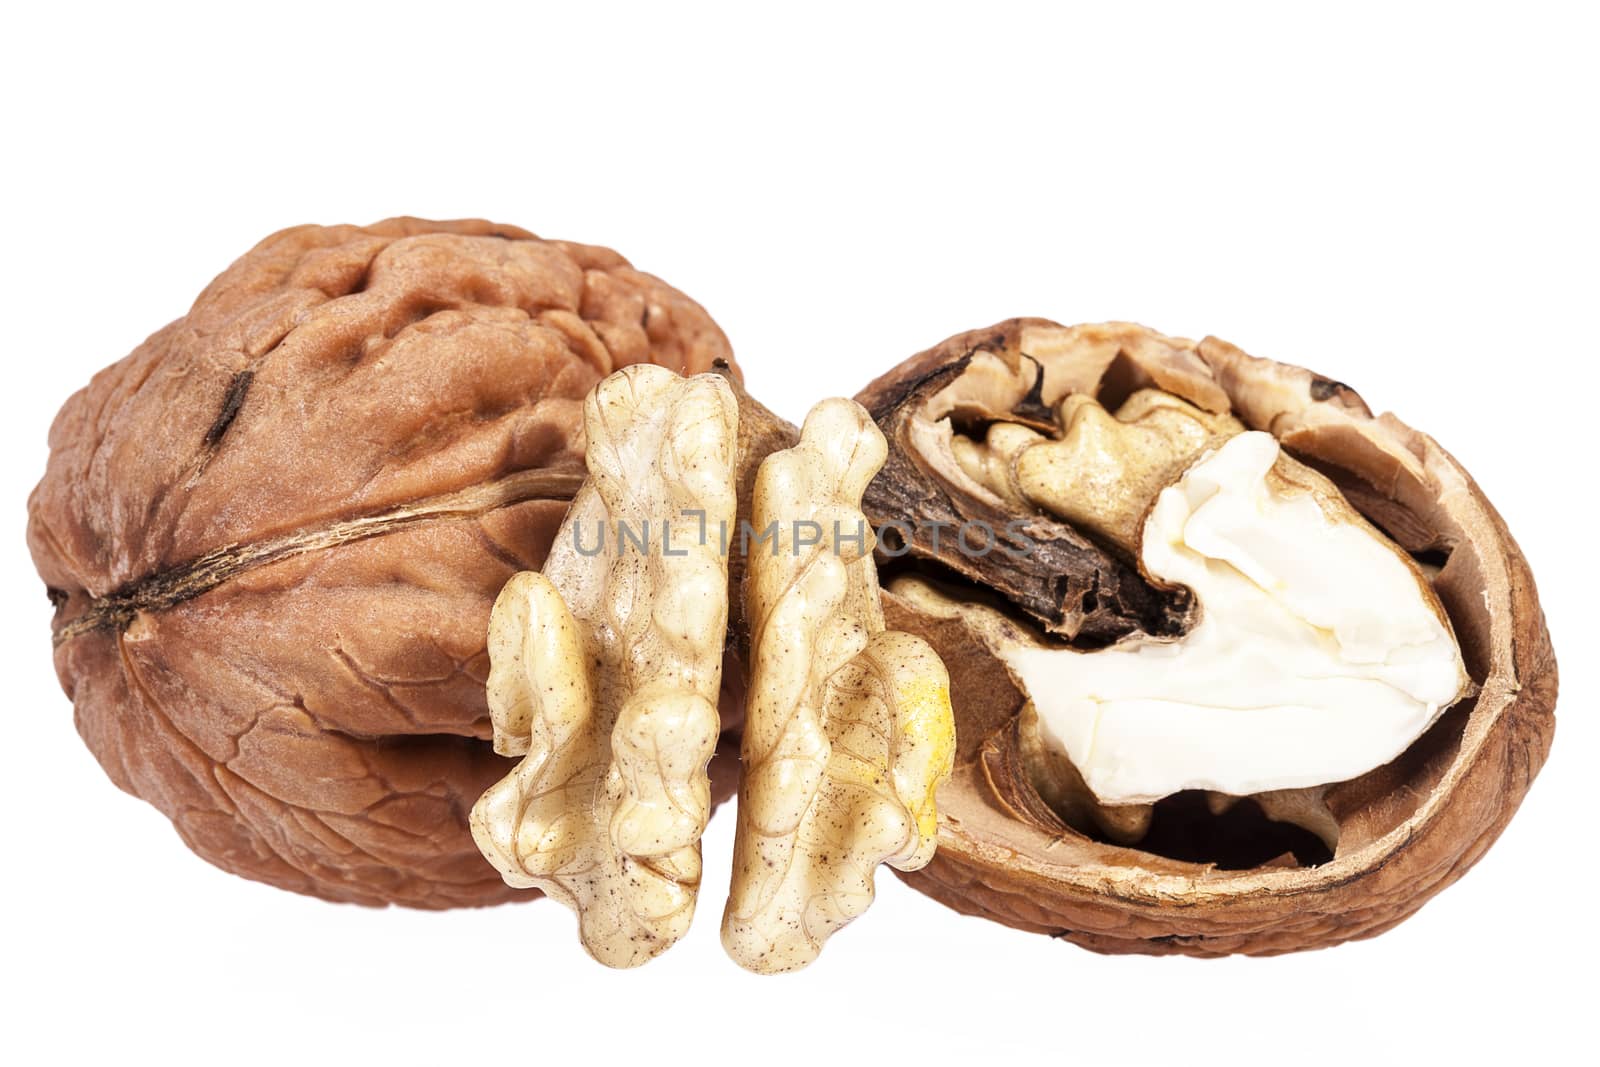 some walnuts isolated on white background by mychadre77